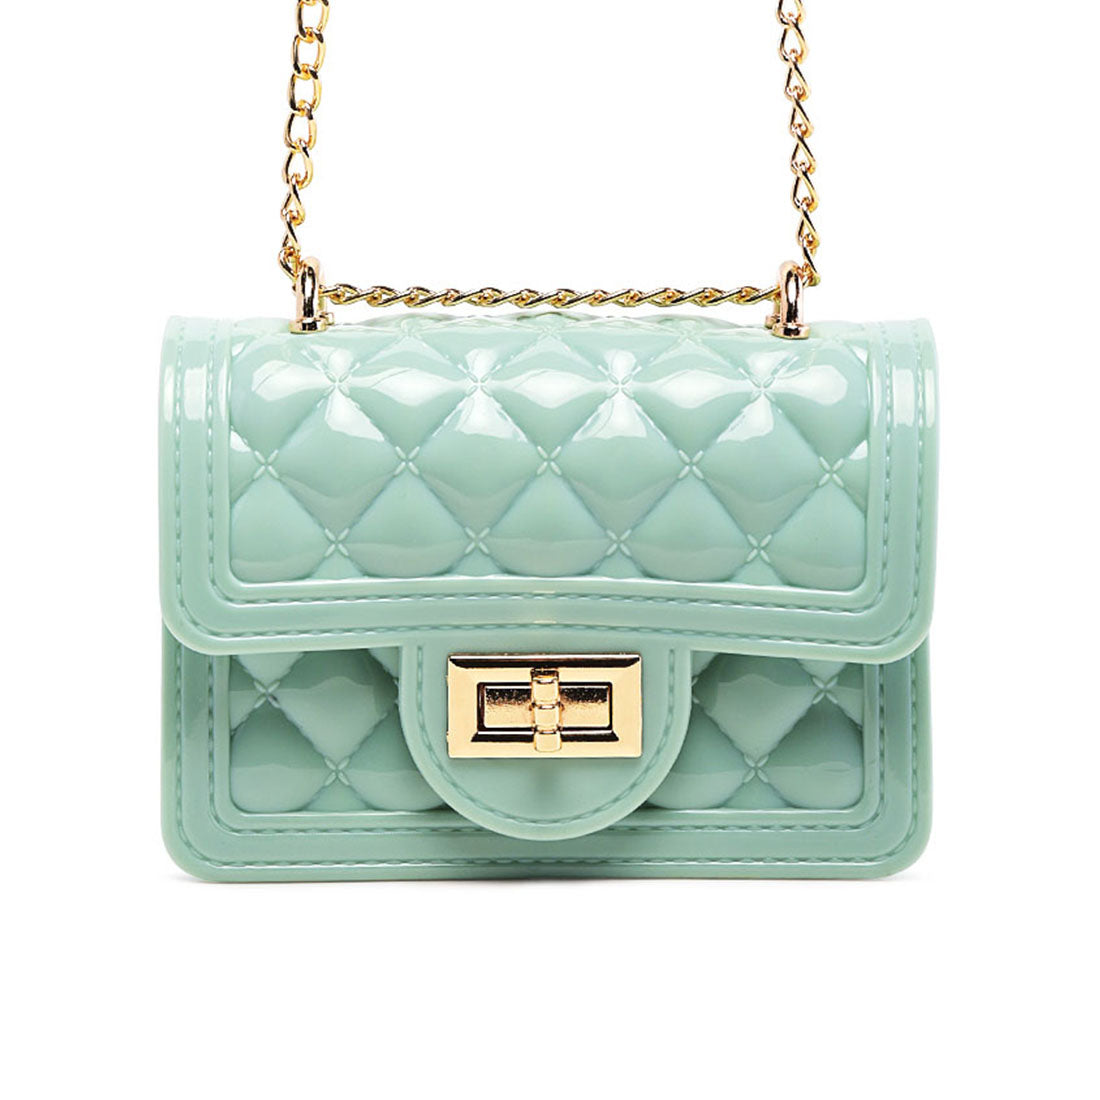 Sling Bag in Quilted Pattern - Mint Green